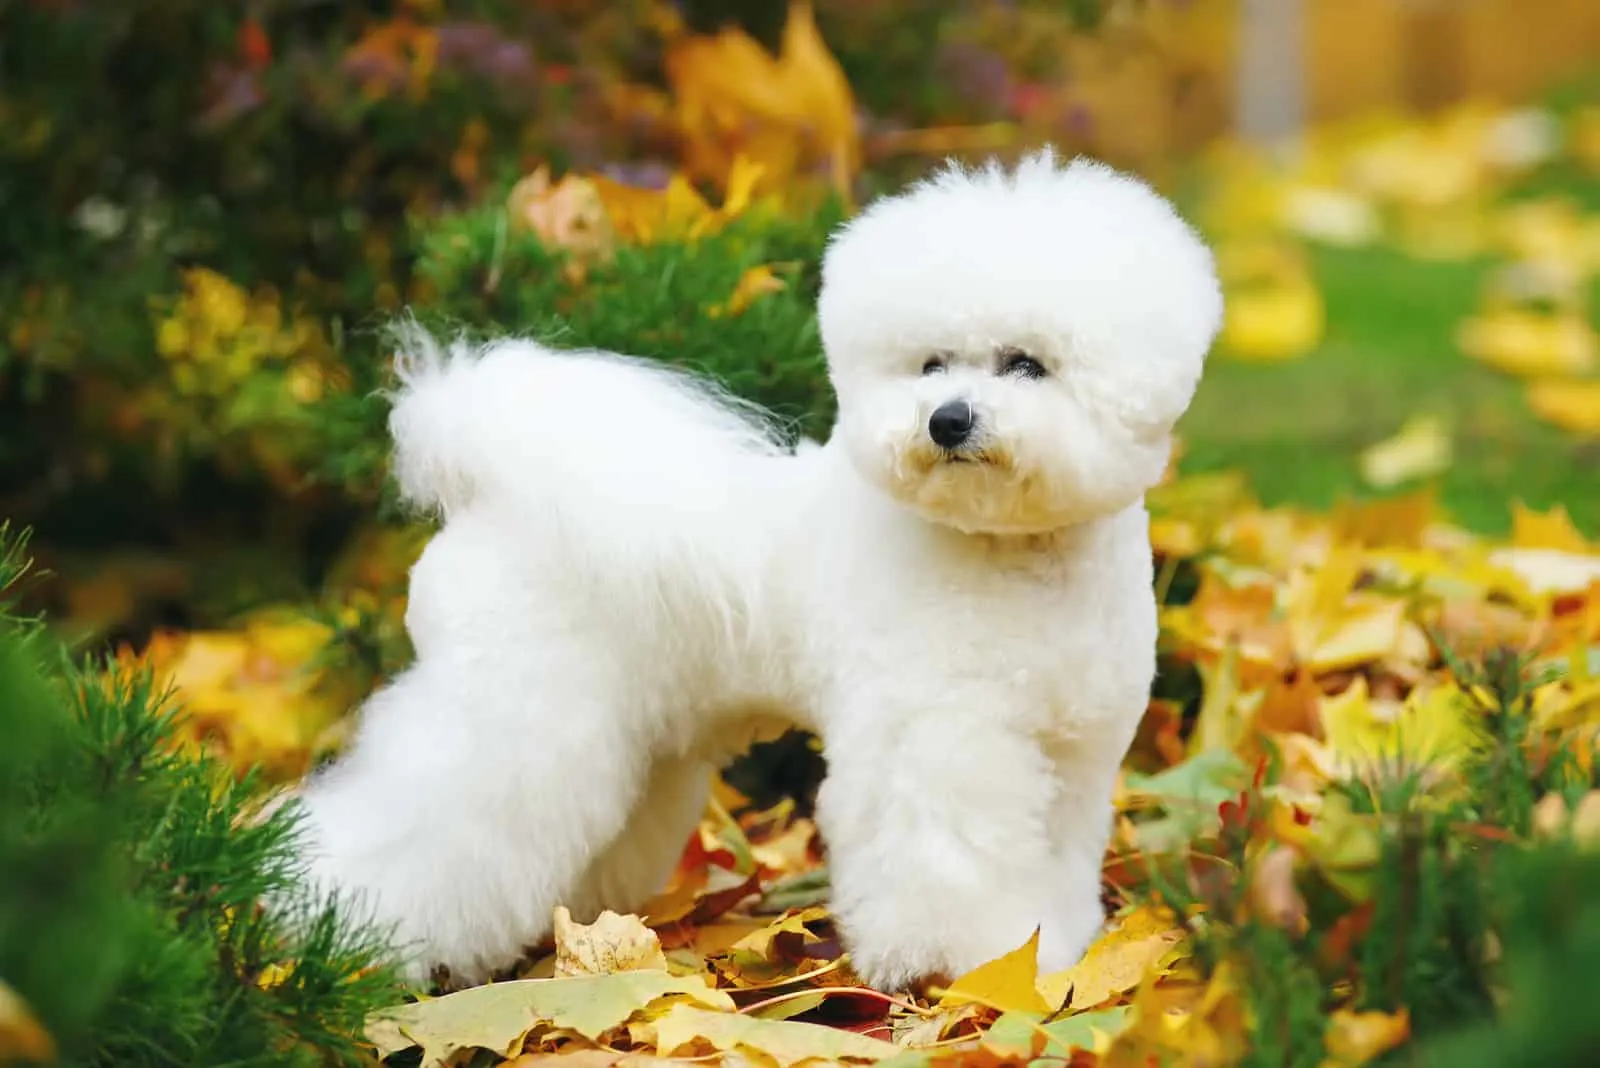 Bichon Frise standing outside on grass